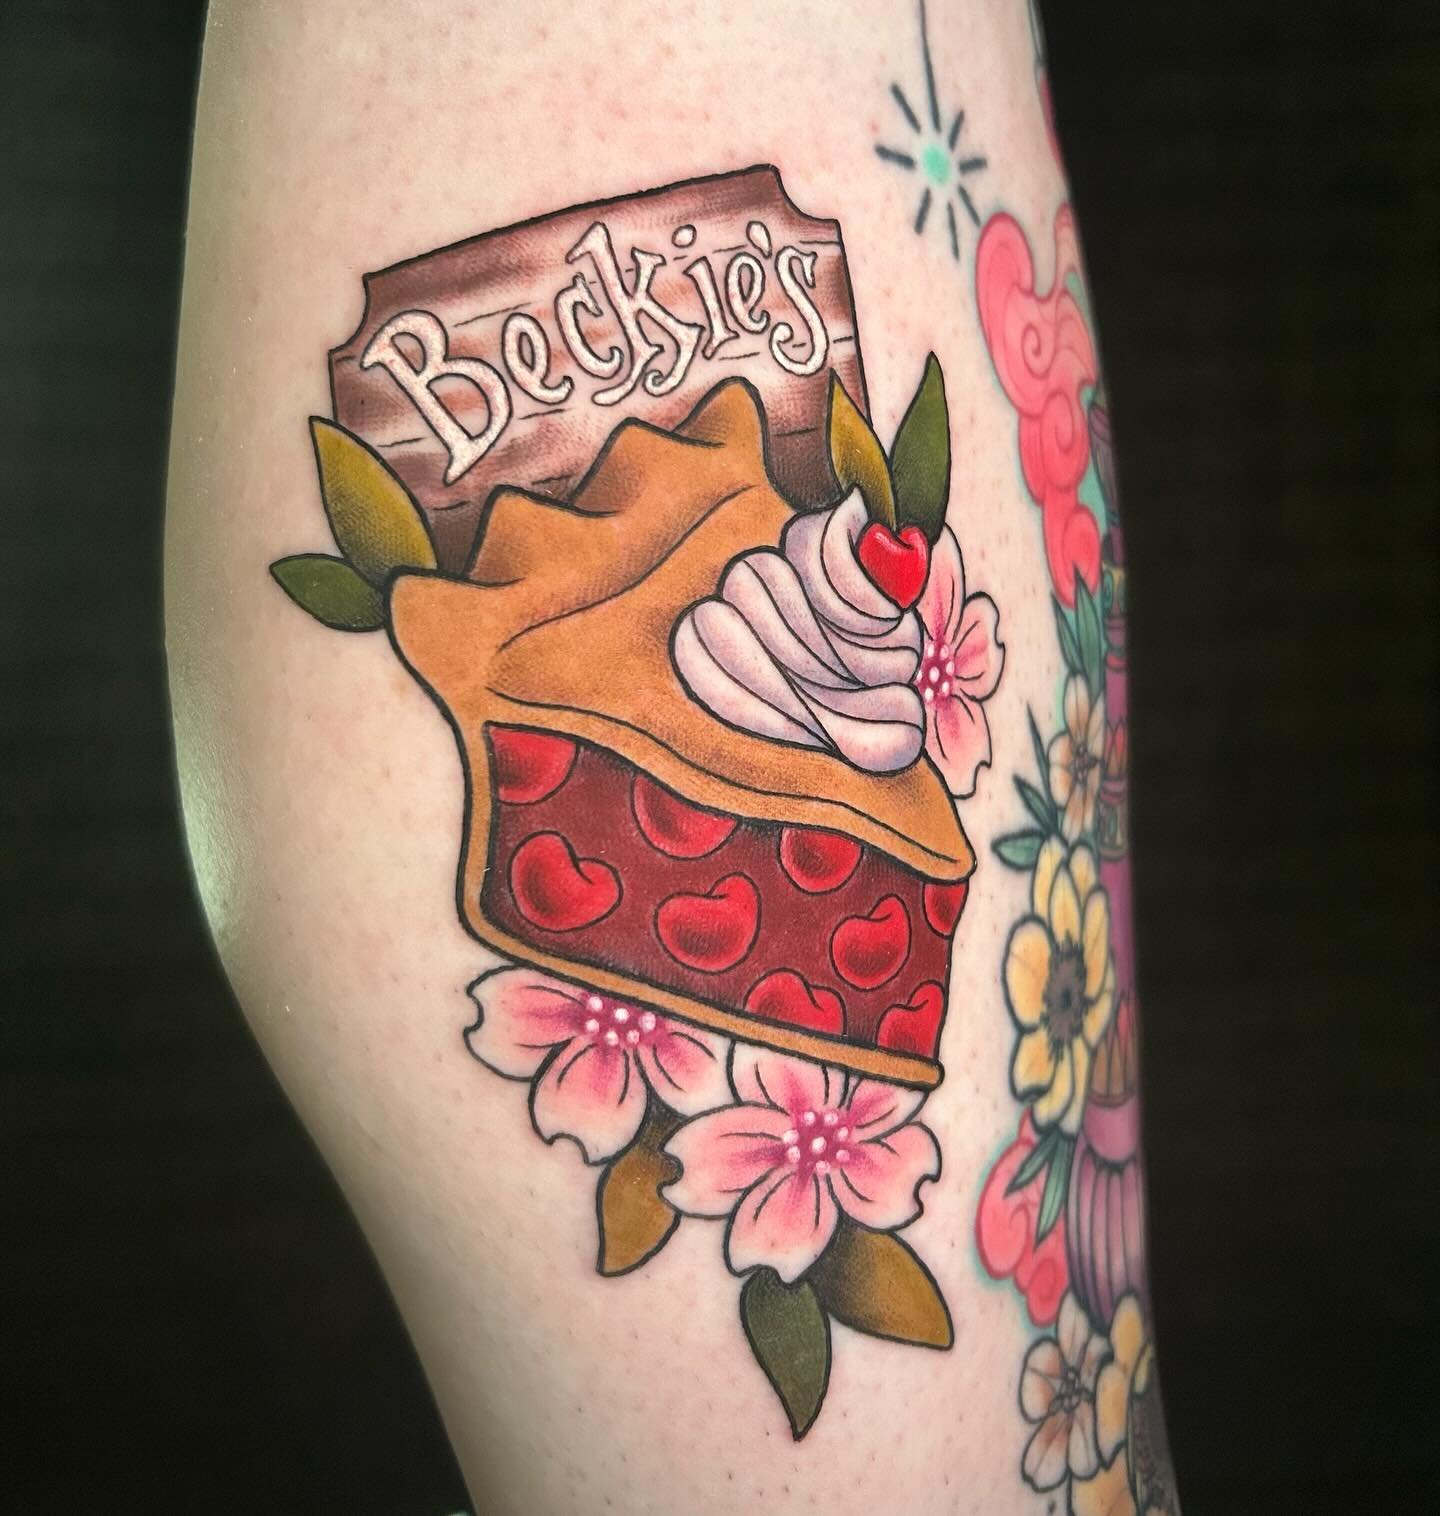 How sweet it is @foofytattoo is Now BOOKING! Click the link in our bio to book an appointment!
&bull;
Tattooed @mainlinetattoo in #chattanooga #tennessee using our faves @secondskintac #foofytattoo @razorbladepro #mainlinetattoo #chattanoogatattoo  #